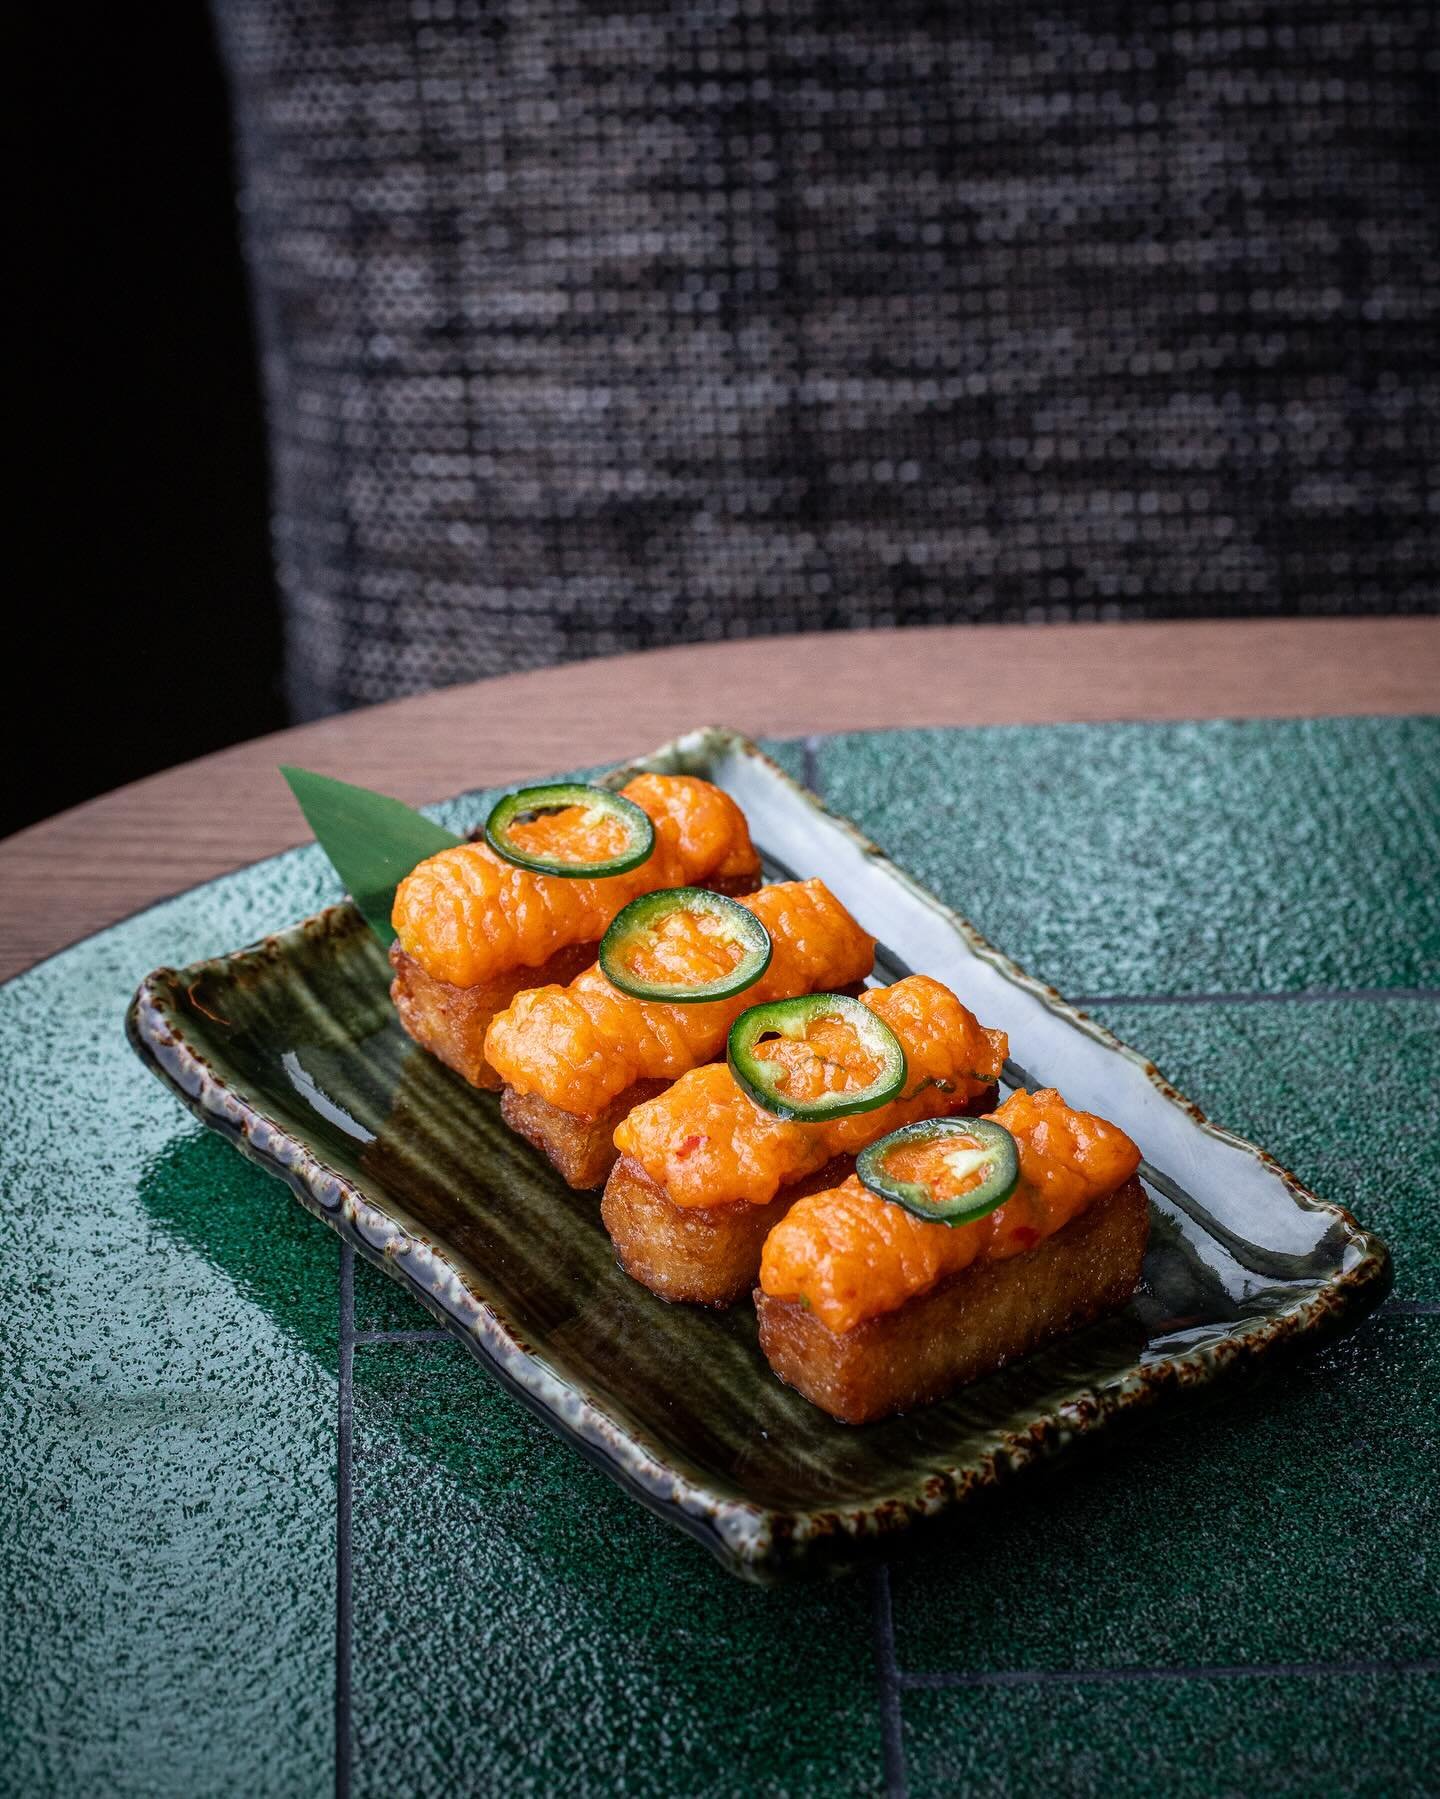 A few favourites have made their way over from our Notting Hill home to grace the pages of our #LosMochisLondonCity menu!

Discover our Spicy Salmon, Truffle Guacamole and Pato, all served on a bed of crispy rice via the link in our bio.